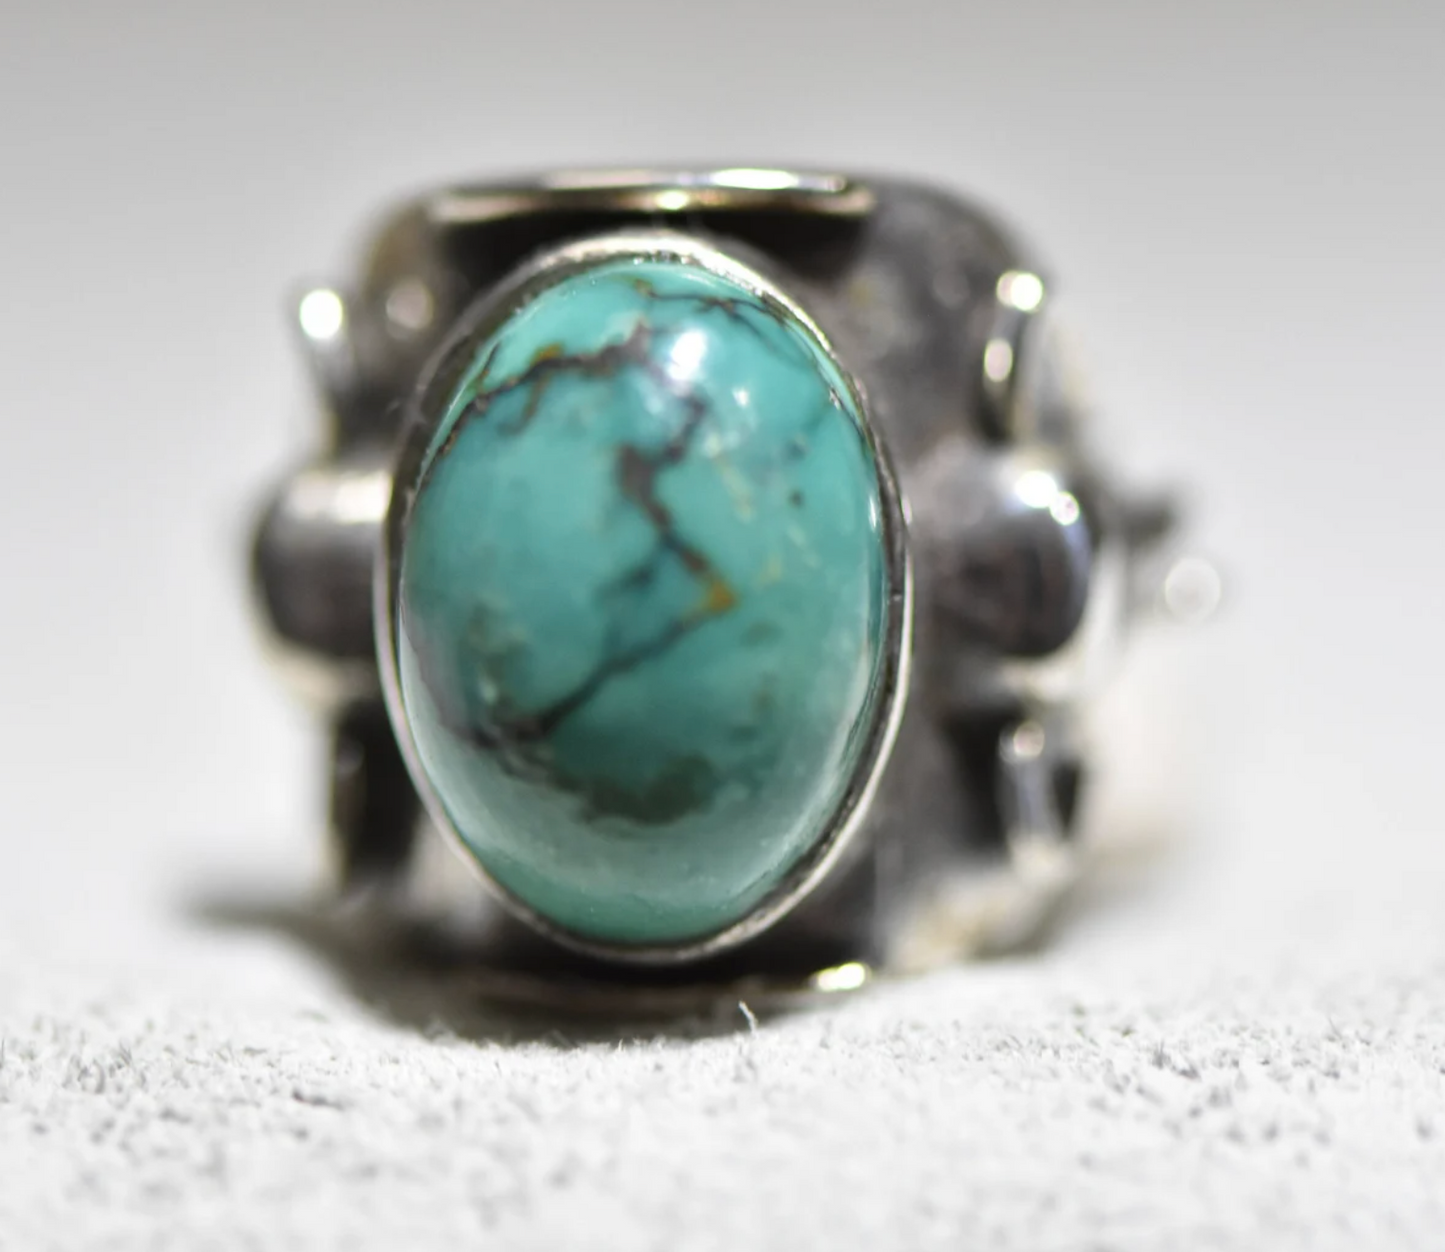 elephant ring turquoise size 7.25 cigar band women sterling silver